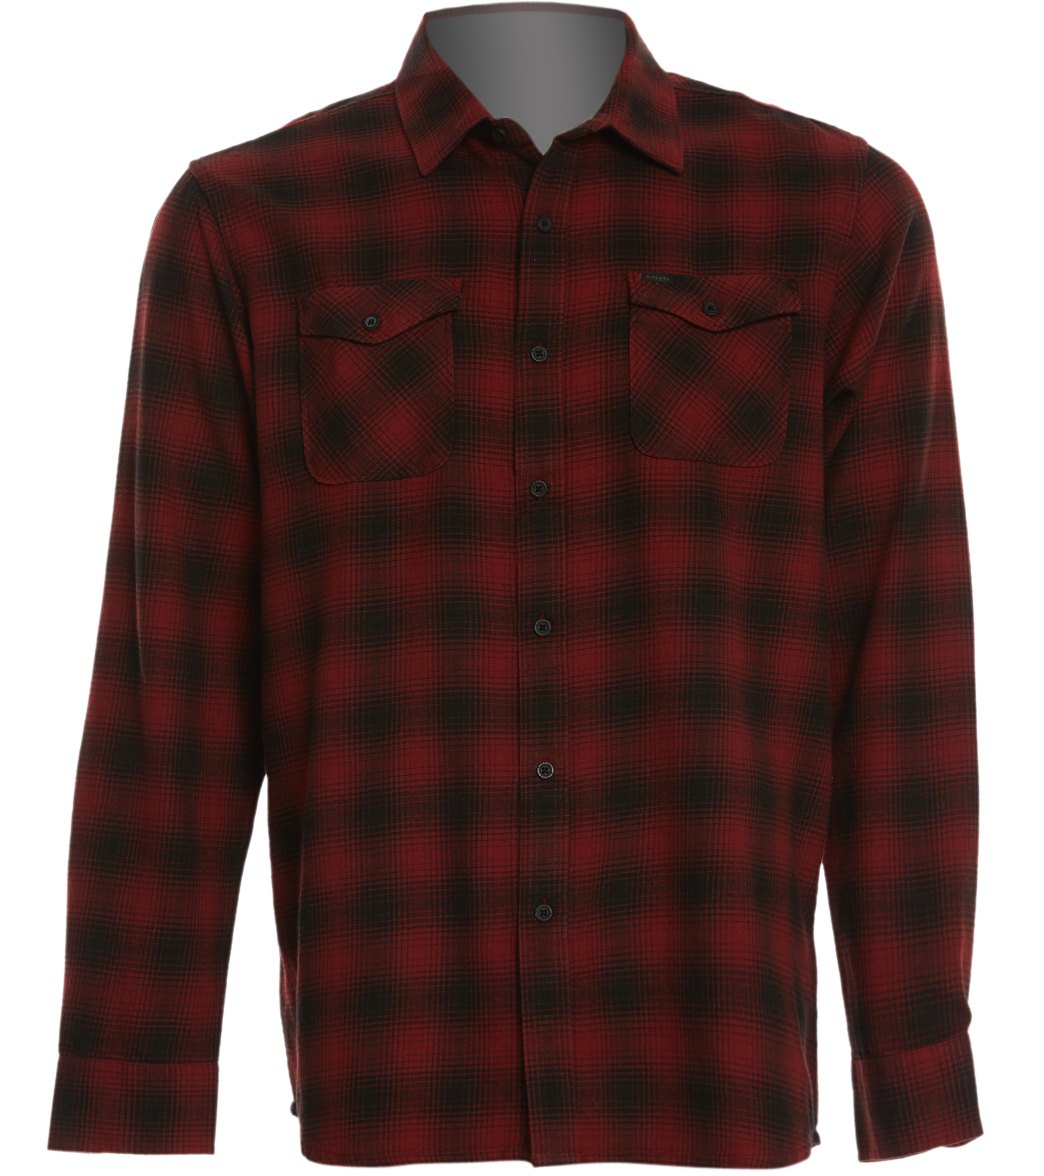 Rip Curl Men's Draco Flannel Shirt - Red Medium Cotton/Polyester/Spandex - Swimoutlet.com